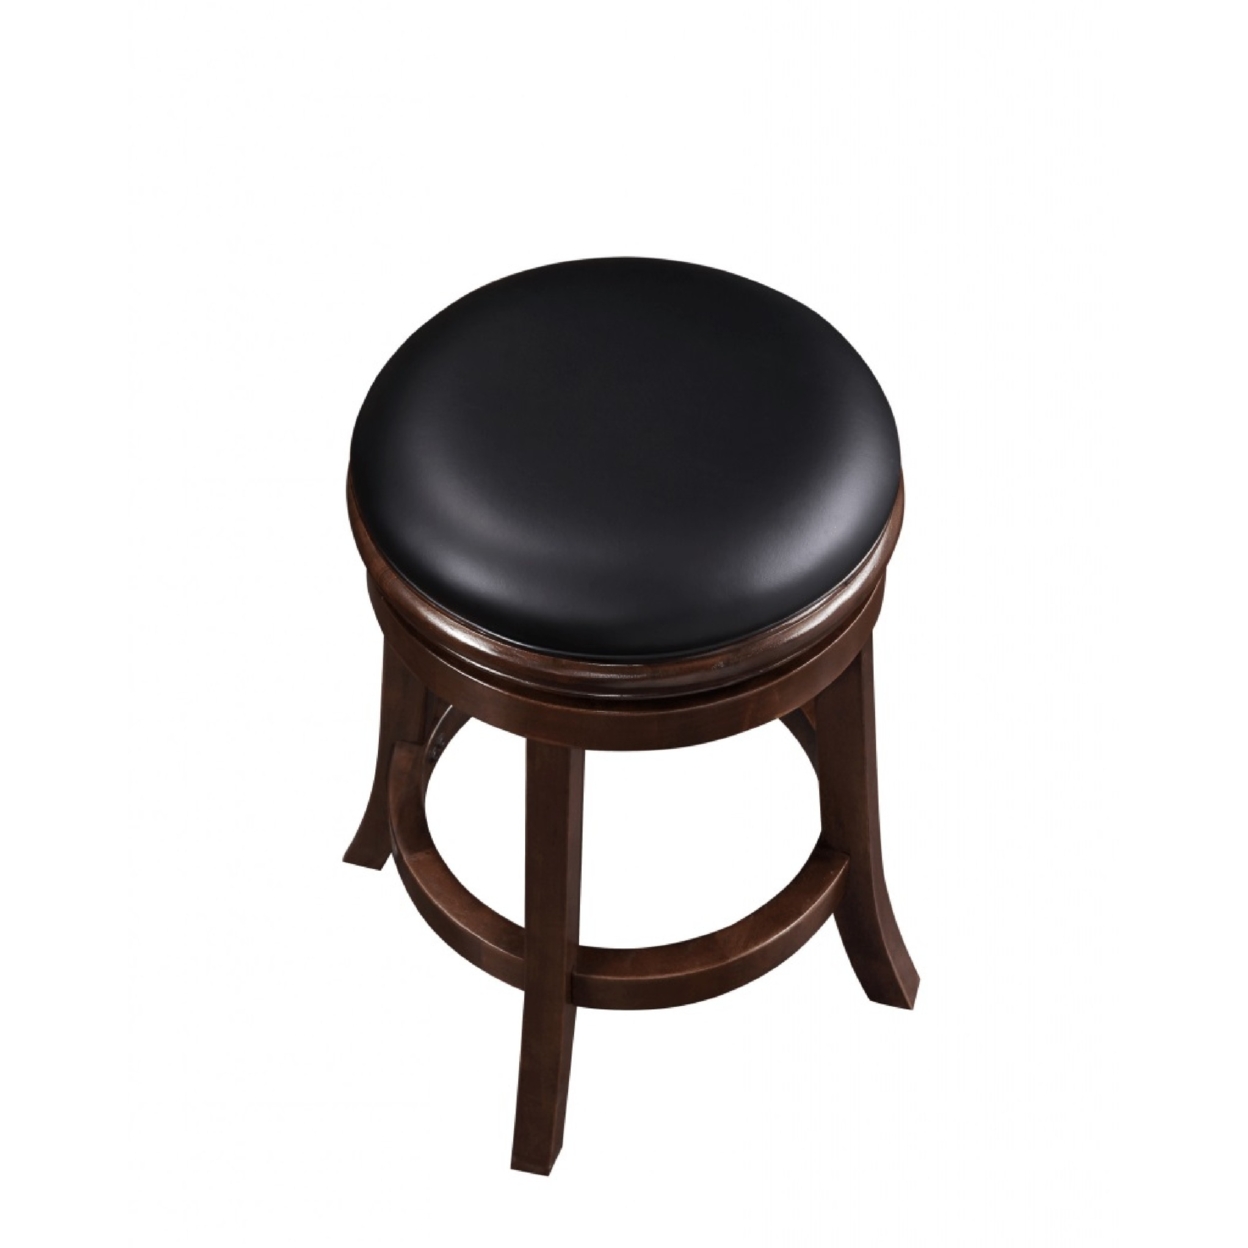 Sabi 24 Inch Swivel Counter Stool, Backless, Solid Wood, Faux Leather, Espresso Brown, Black